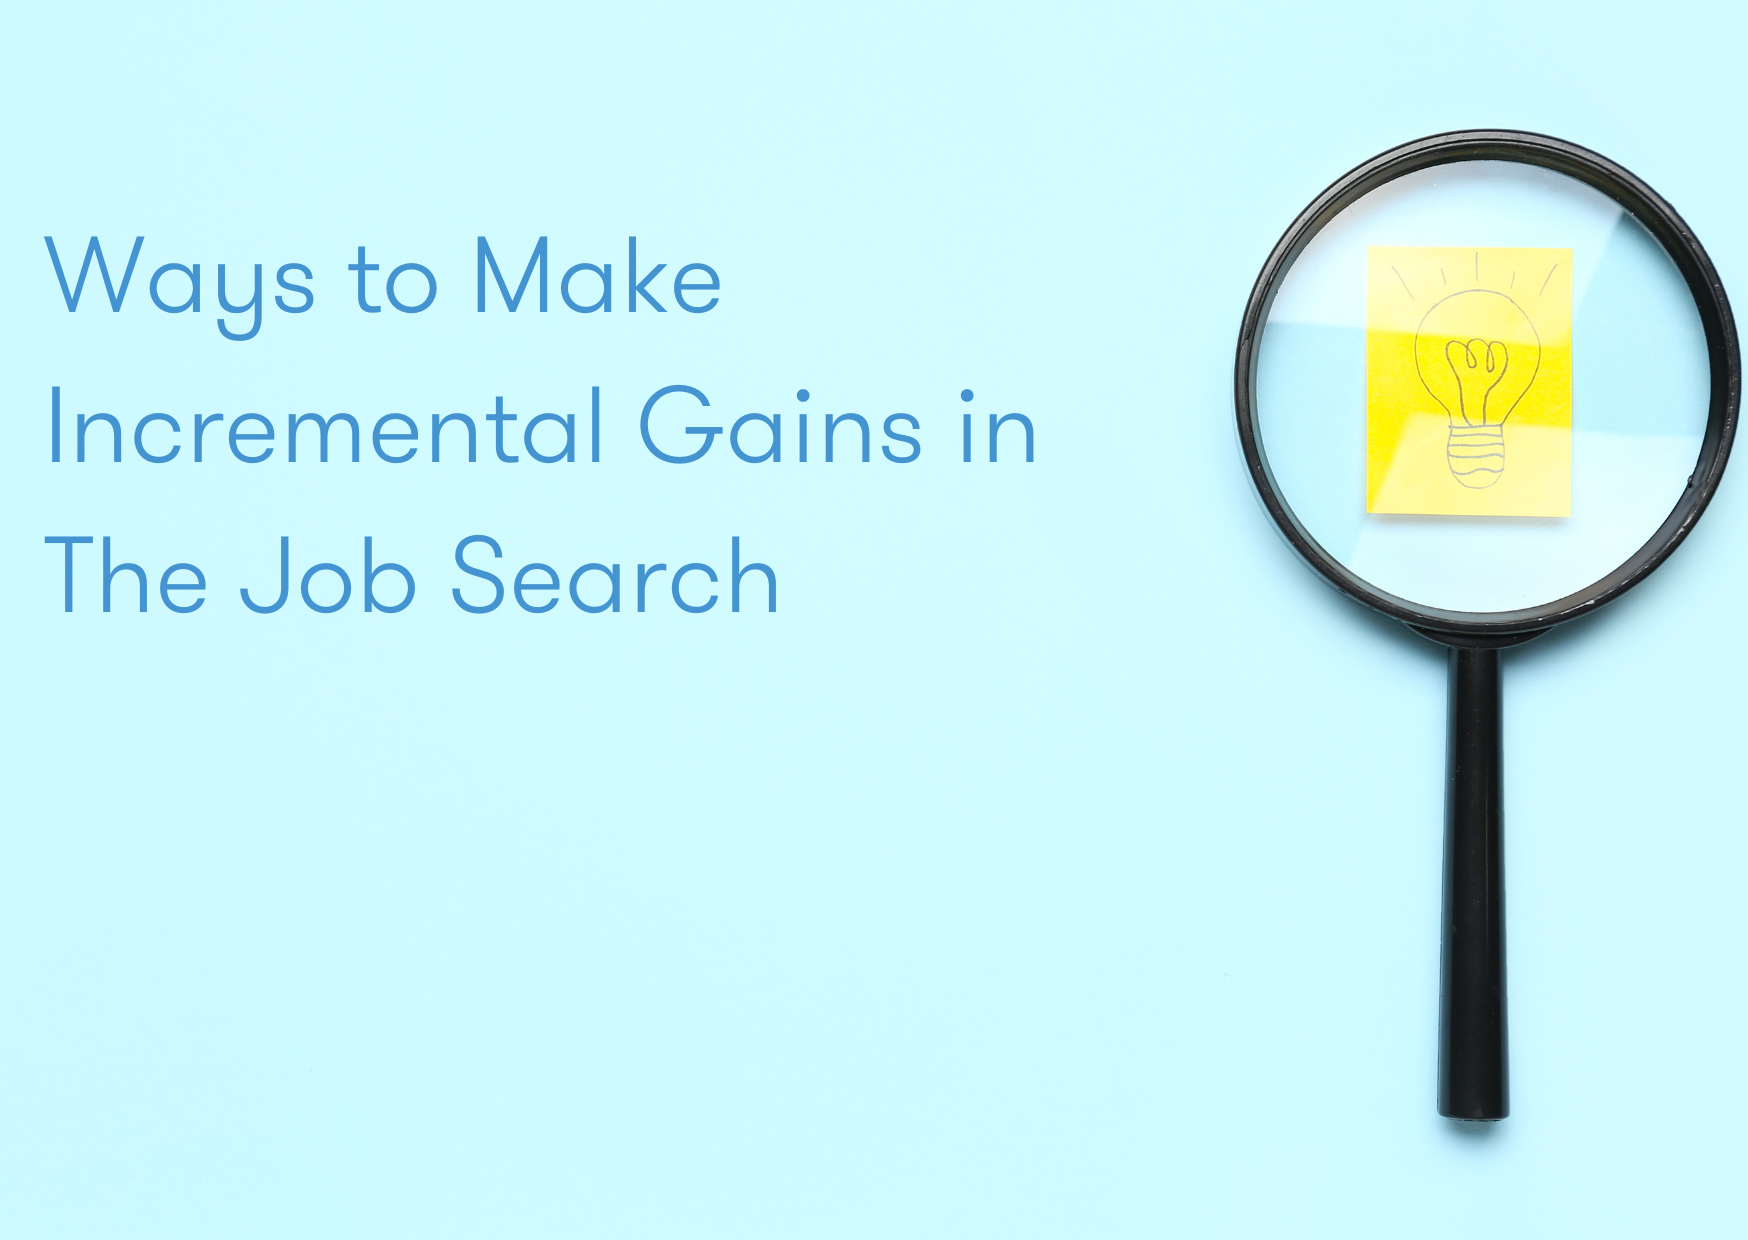 Ways to Make Incremental Gains in The Job Search